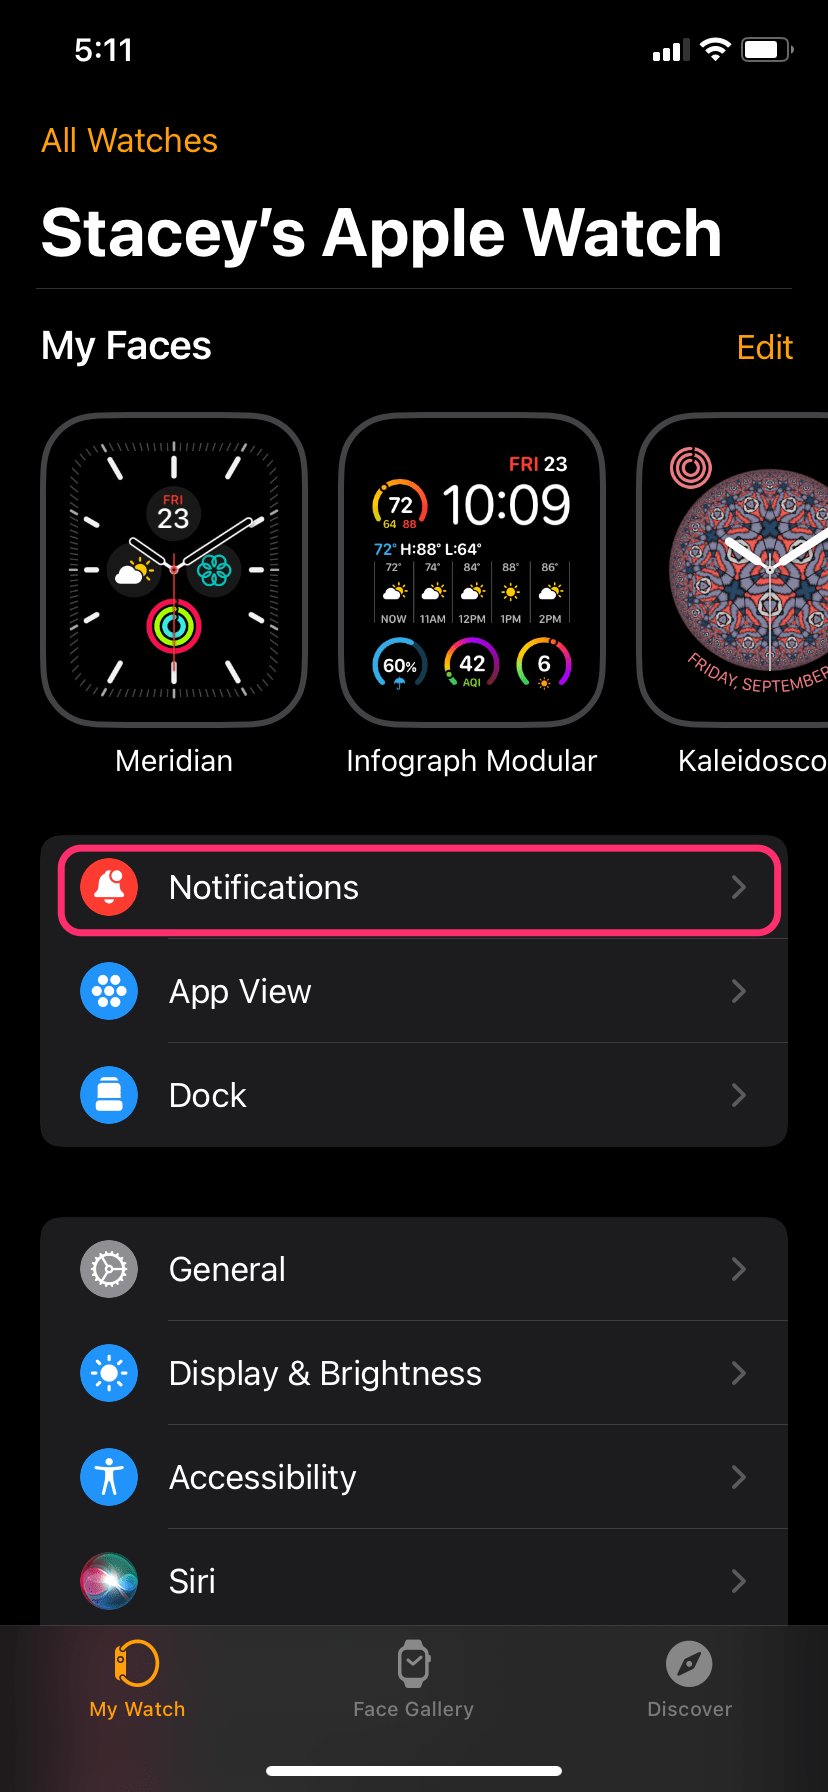 Notificaitons in the Watch app on iPhone